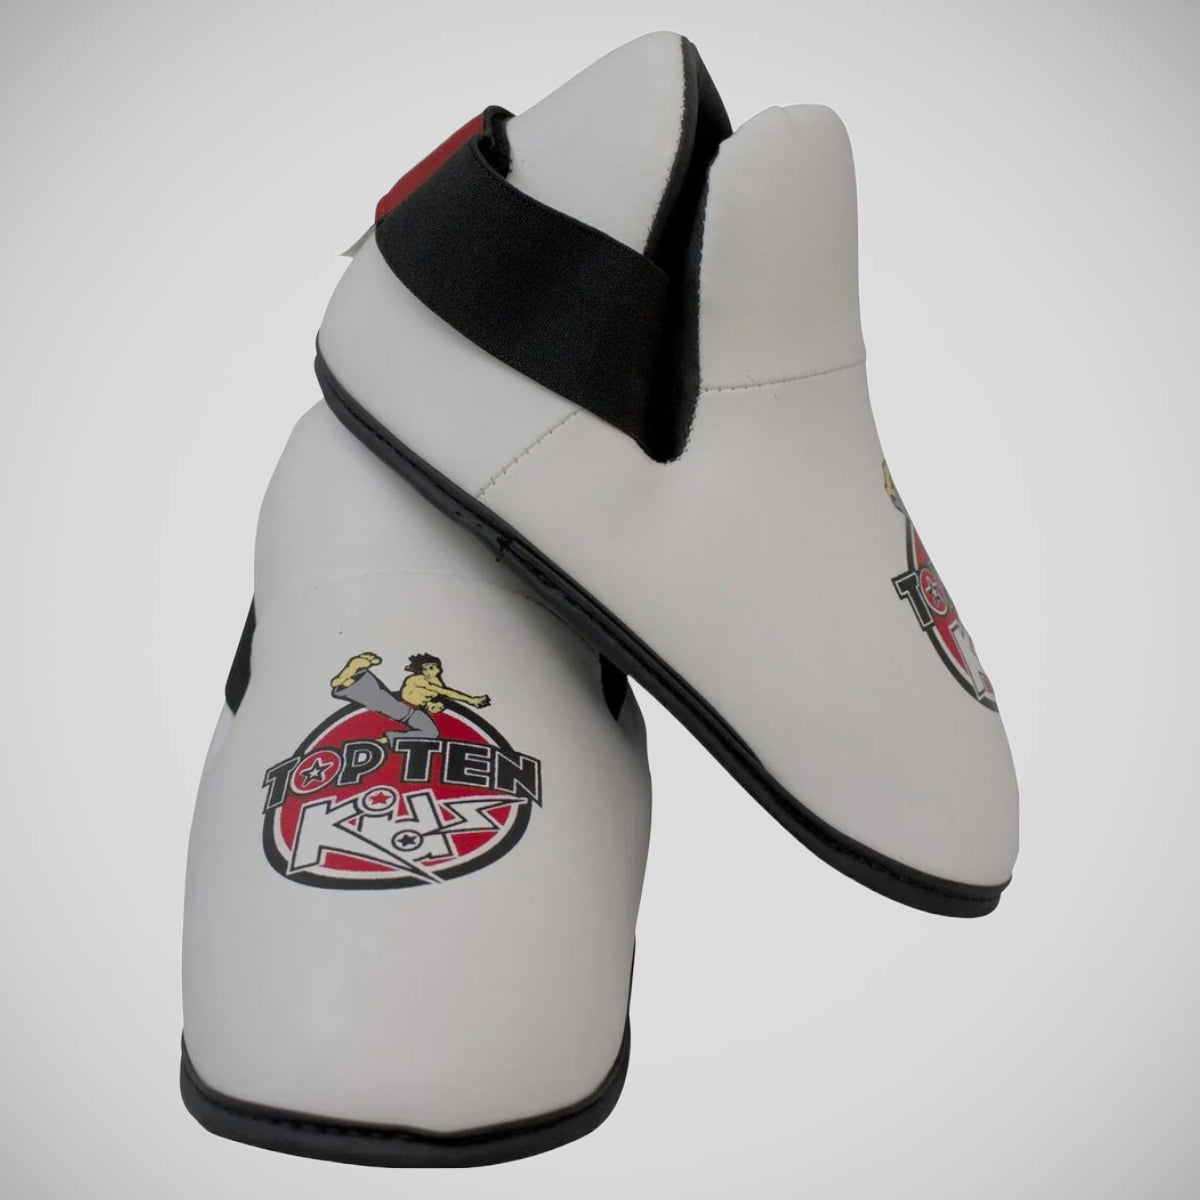 Kids Sparring Foot Gear & Sparring Boots from Made4Fighters